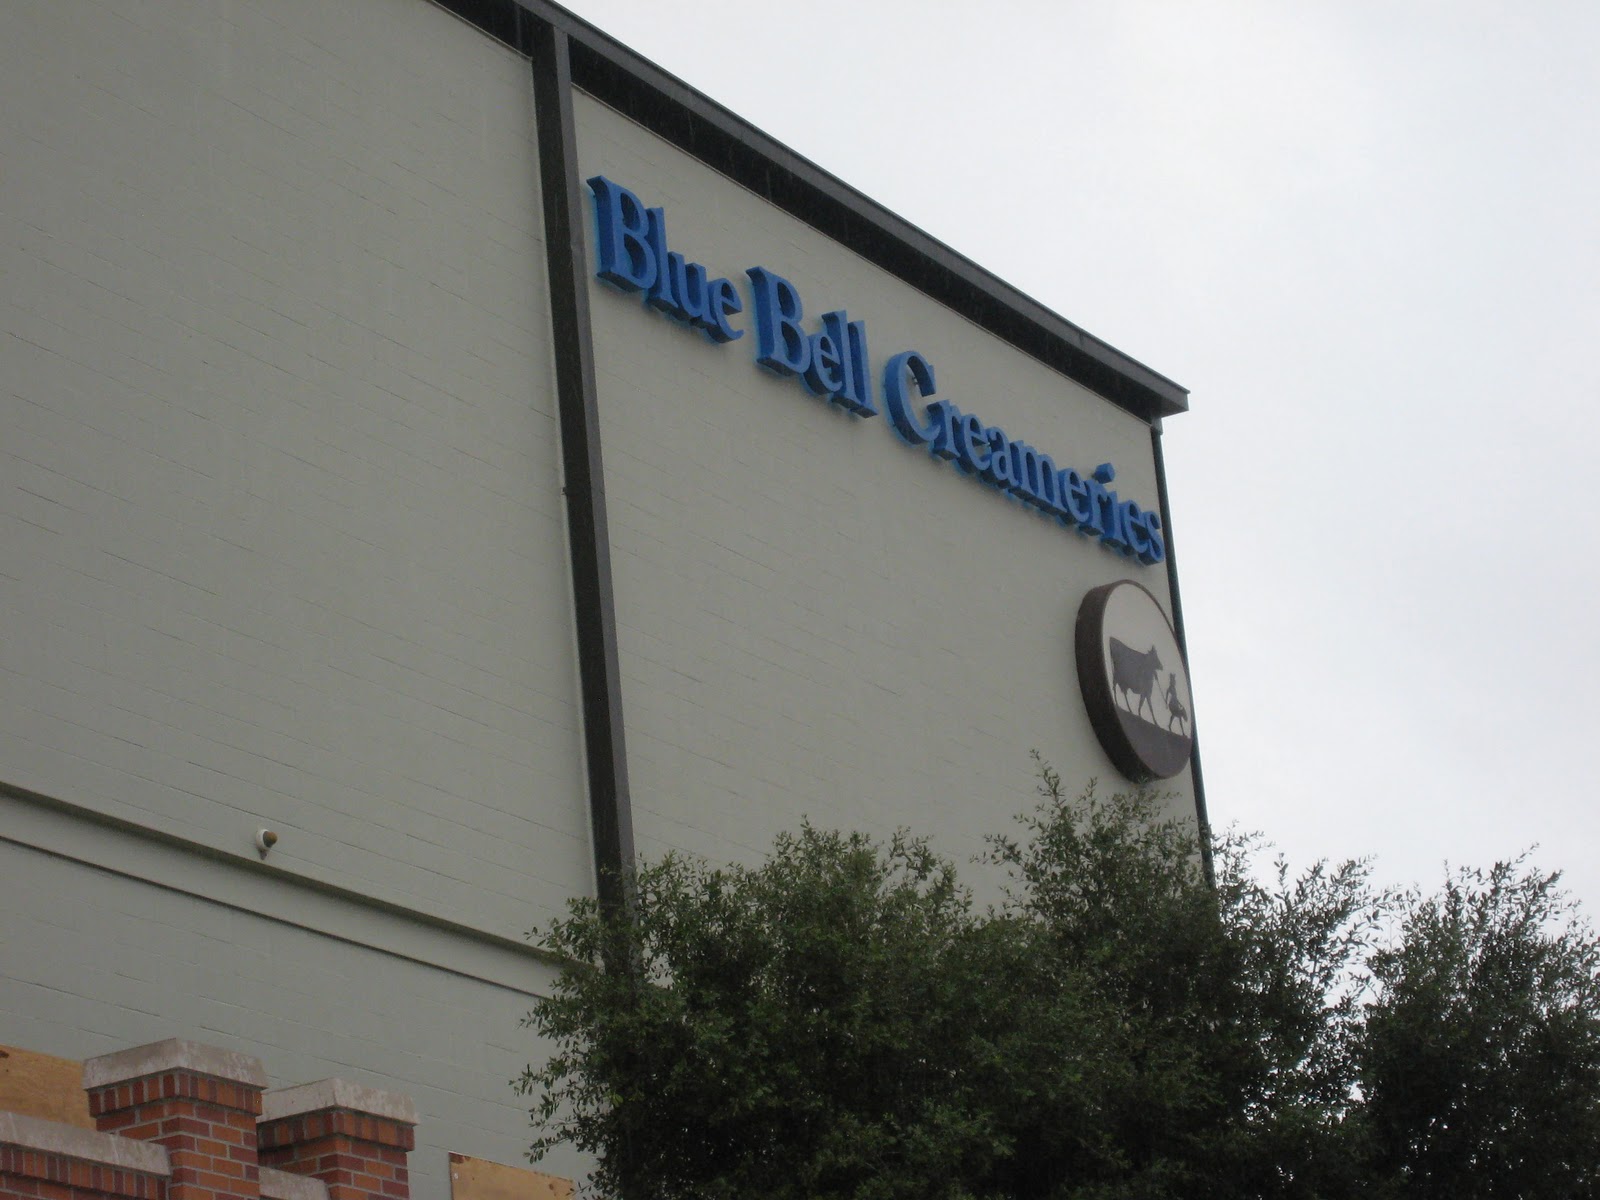 blue bell factory tour tickets cost